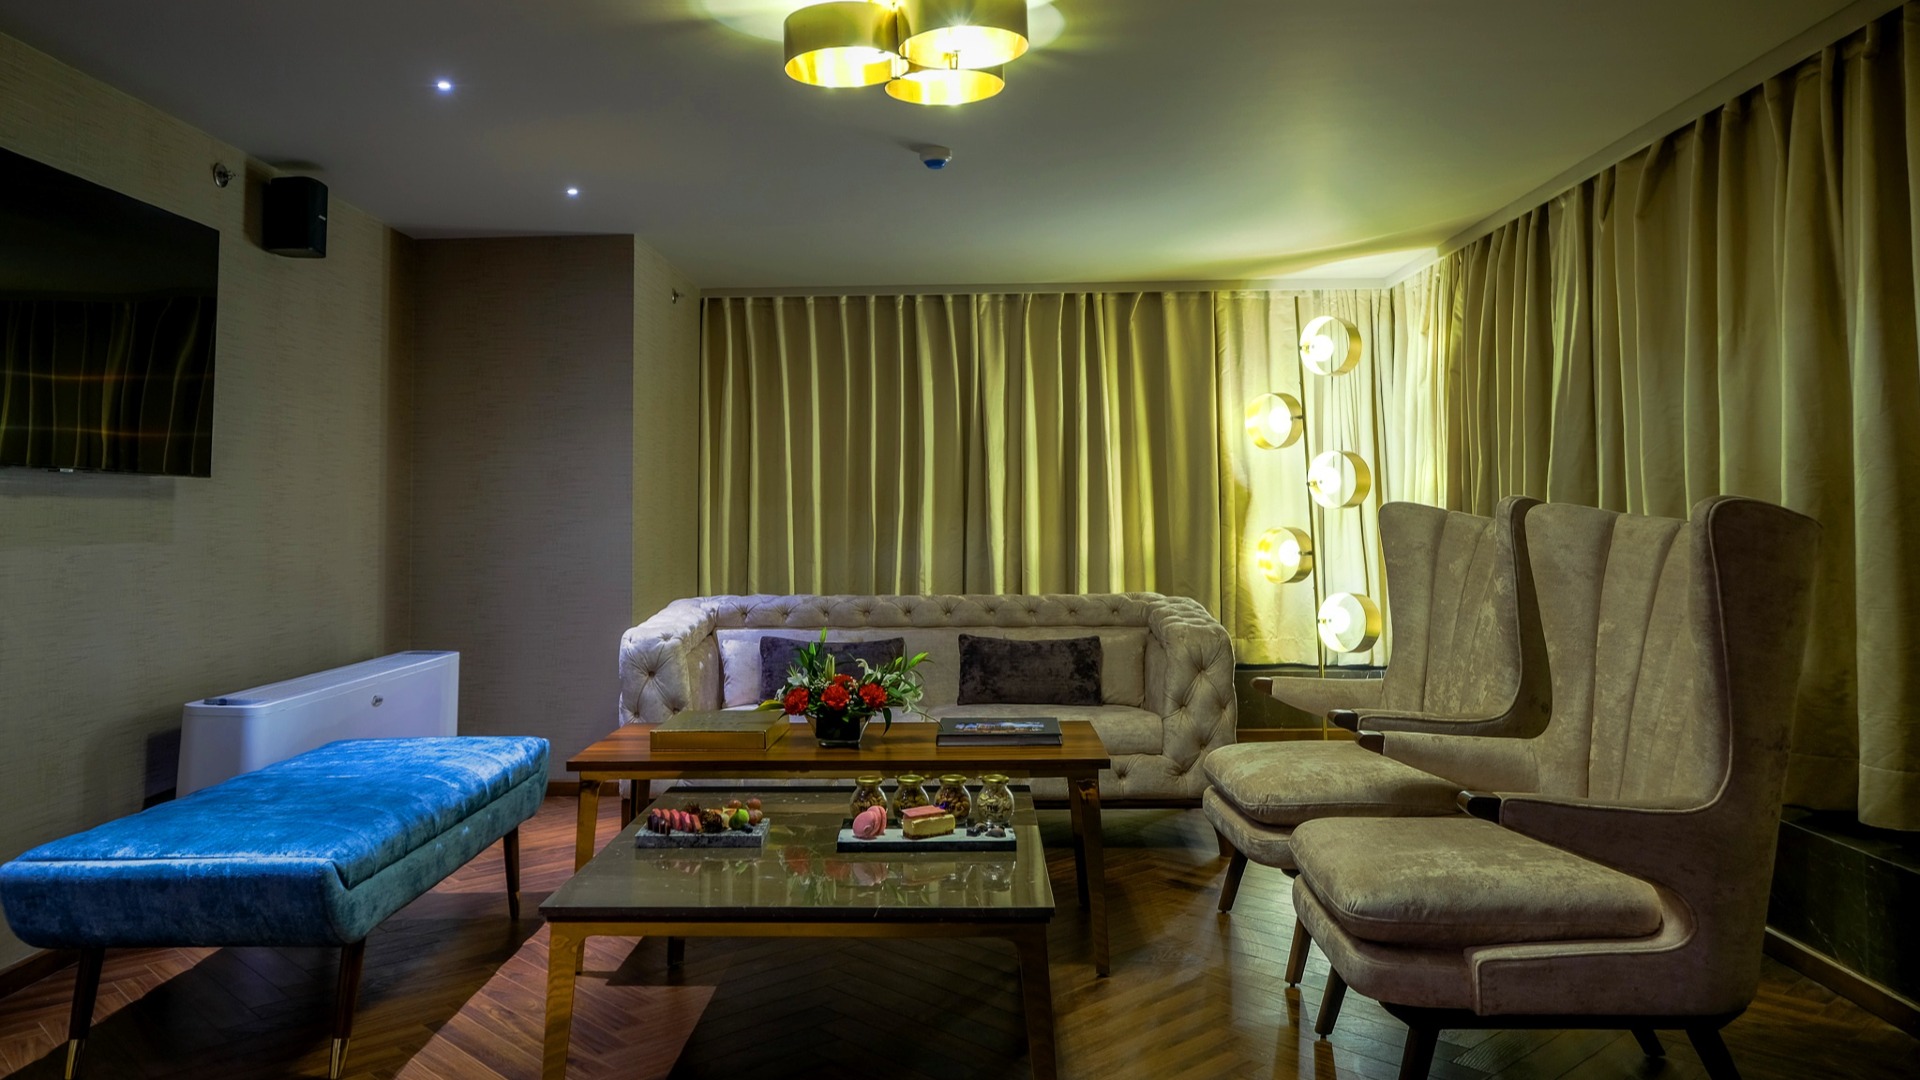 Interior design of Living room lounge area at The Park Hotel Indore